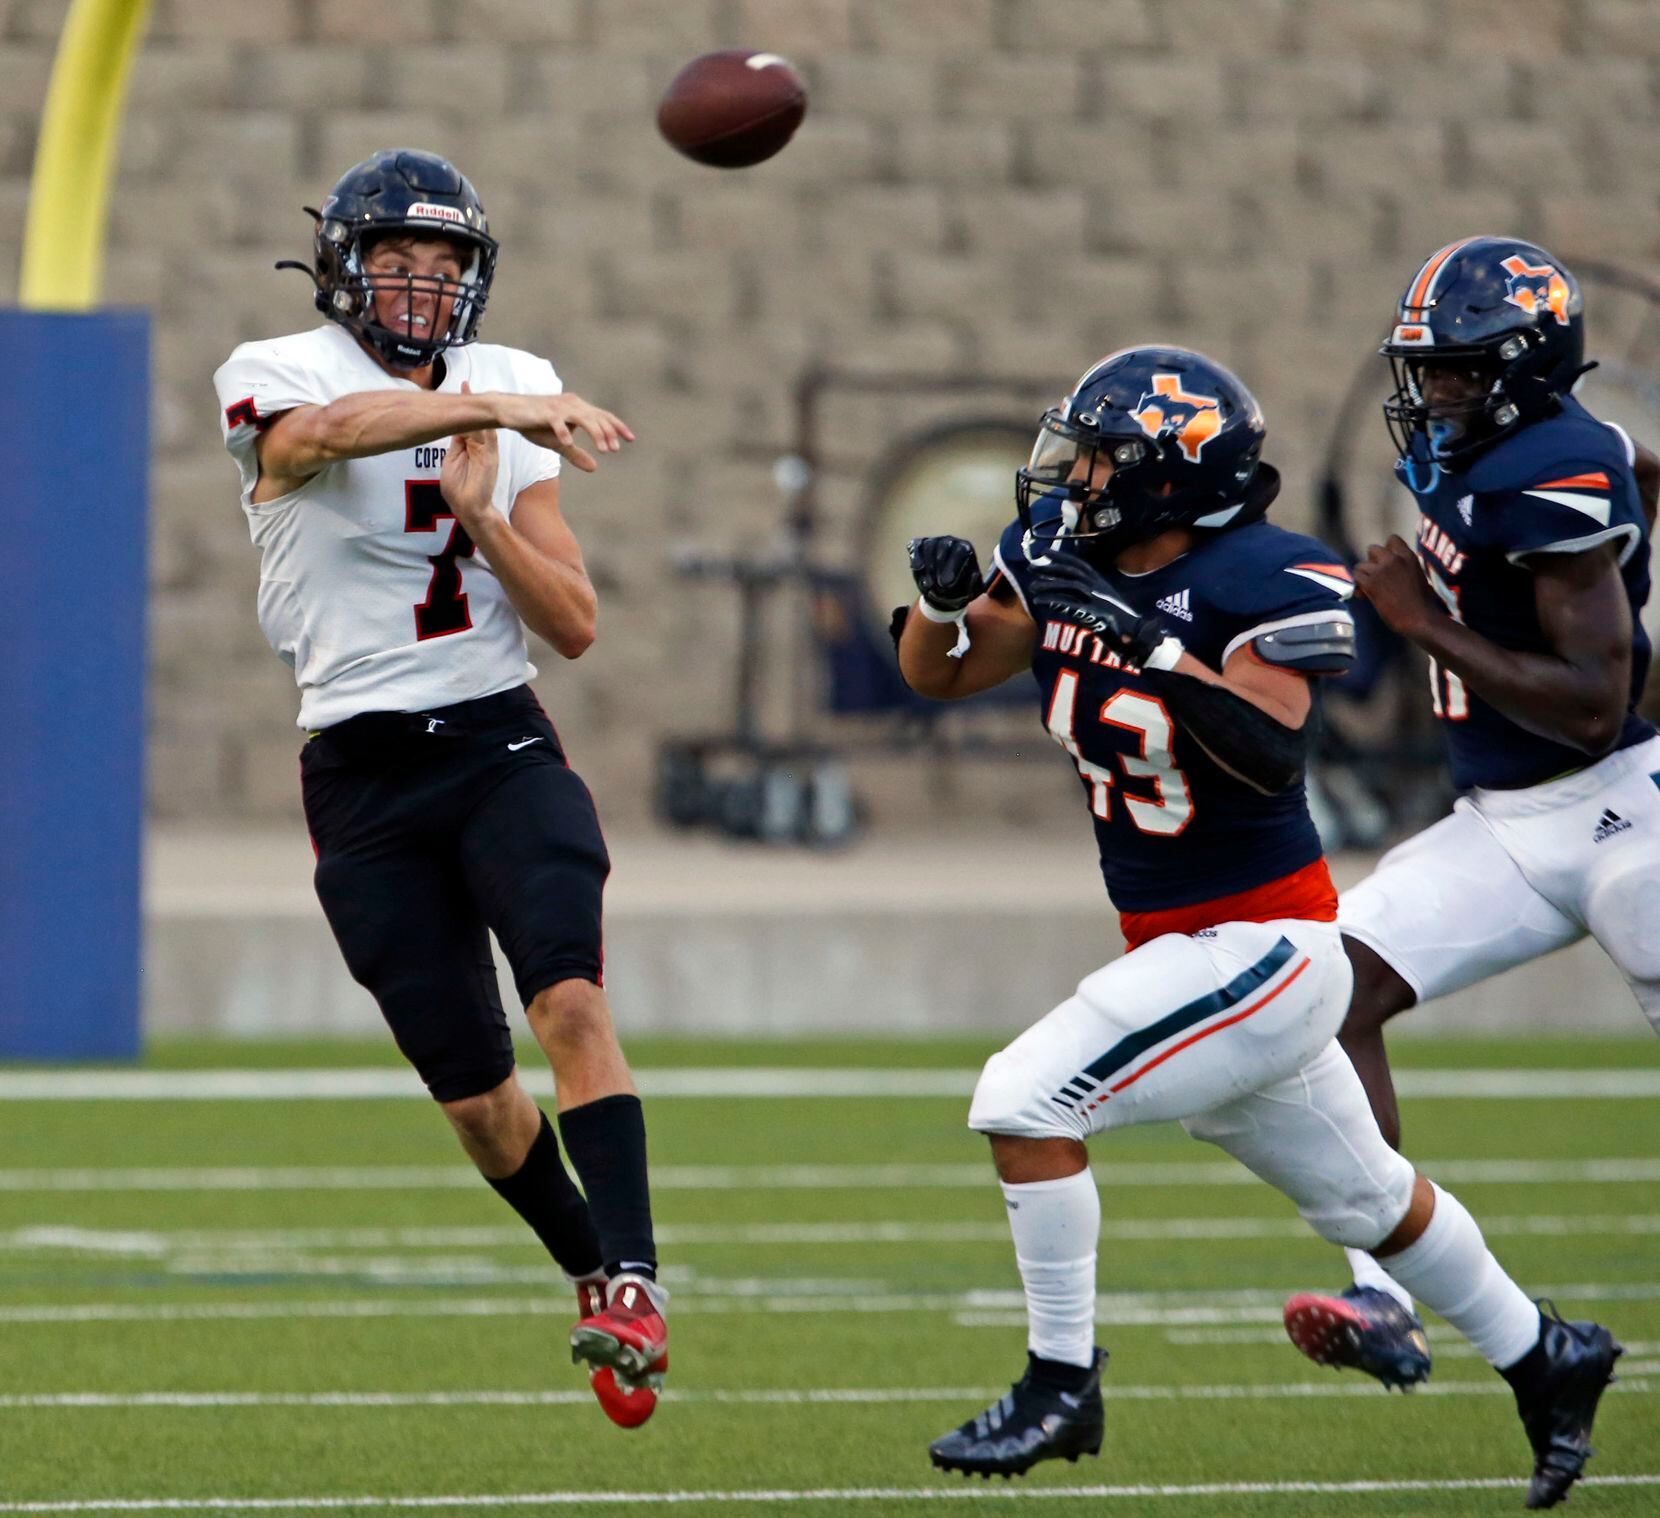 Coppell QB Jack Fishpaw (7) throws a pass under pressure by Sachse defender Jonathan Chian...